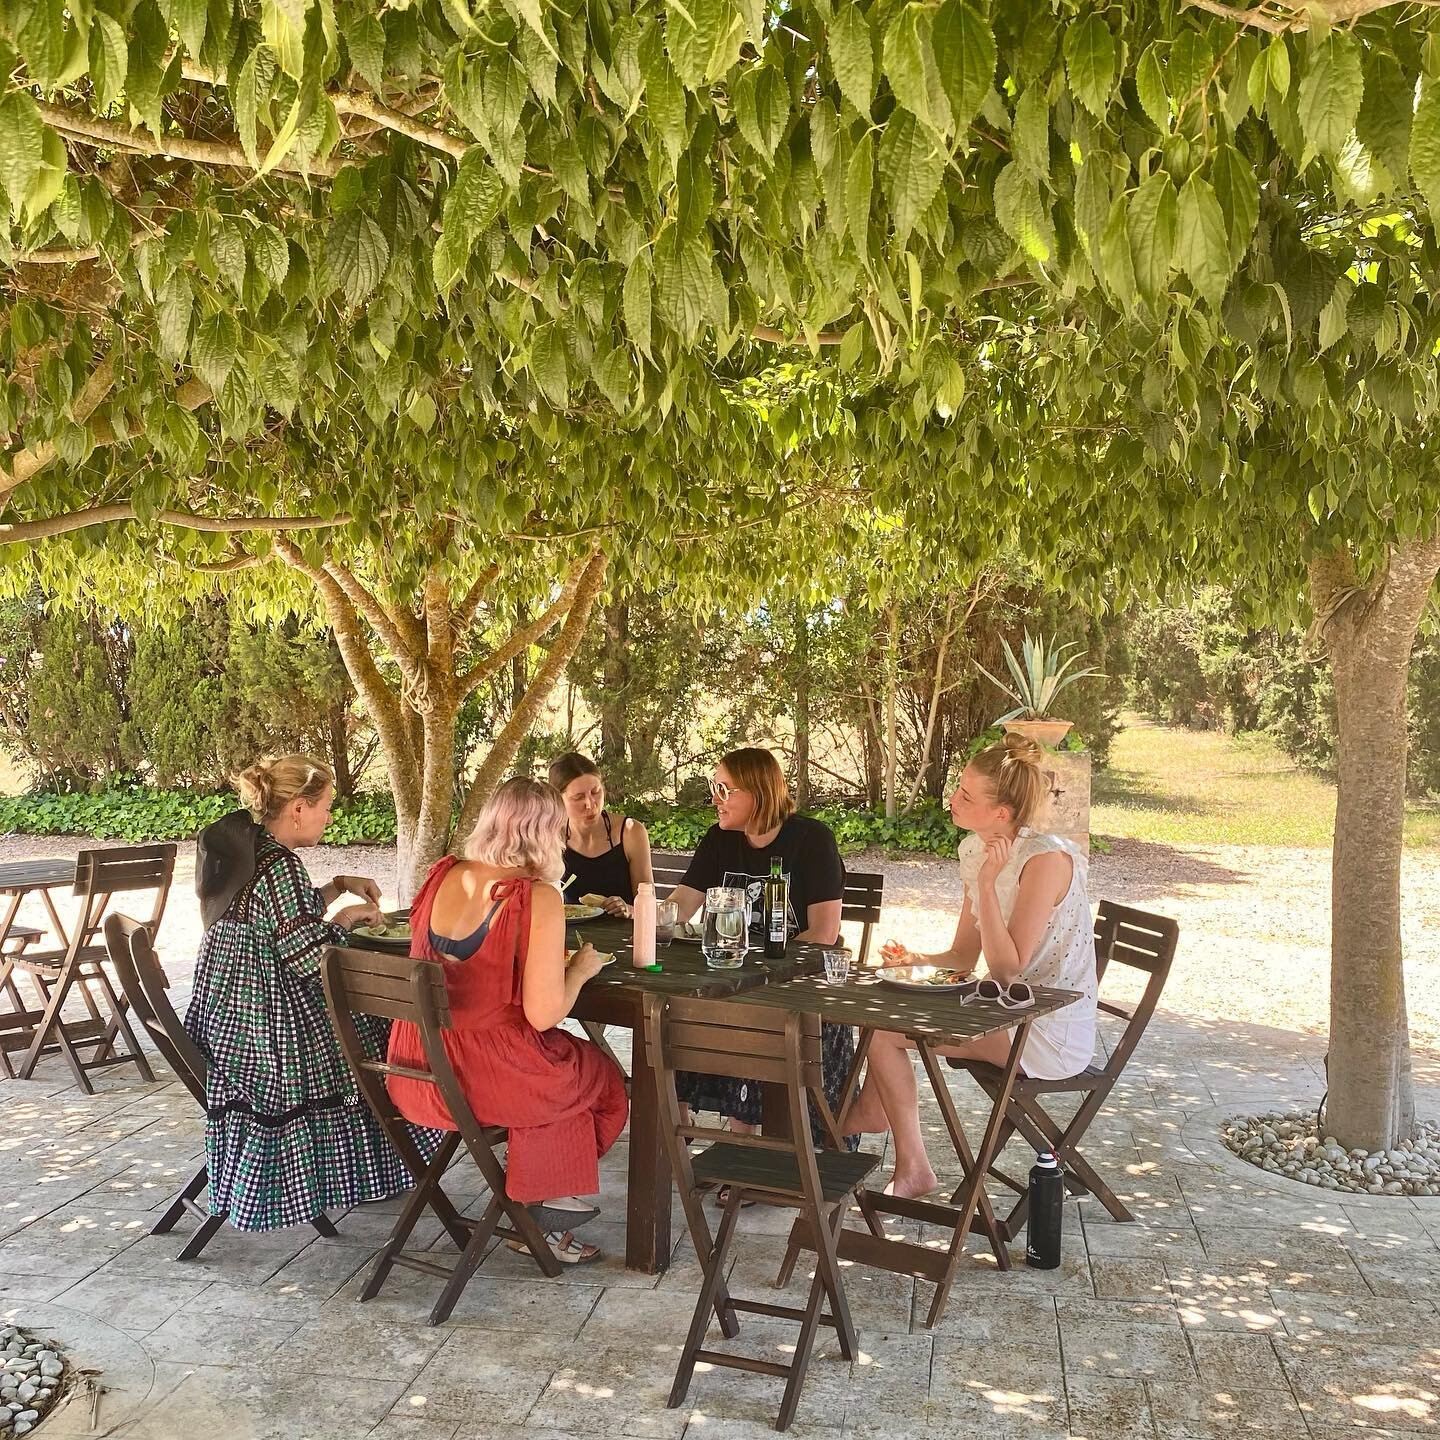 Lovely team here today, enjoying lunch under the olive trees. 
So great to meet new friends and re connect with old ones!!! 
.
.
#locationmallorca #mallorcalocation #mediterraneanstyle #photolocation #filmlocation